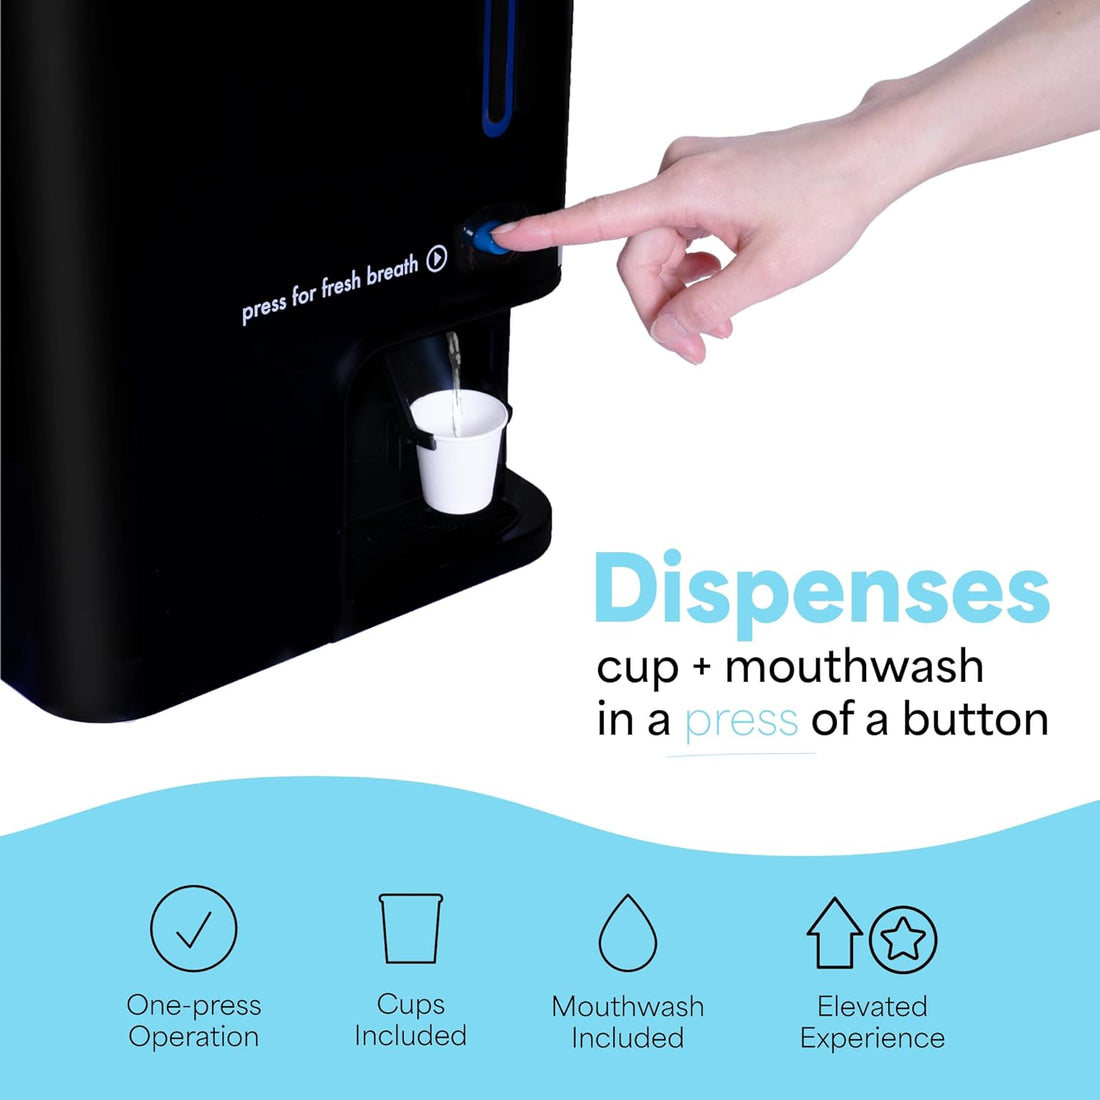 Sol Automatic Mouthwash Dispenser, Commercial and Home mouth wash dispenser, 1.5L Frosty Mint Mouthwash Bottle, Alcohol-Free, with paper cups 100, For bathroom, Tamper proof, Wall Mount or Stand Alone